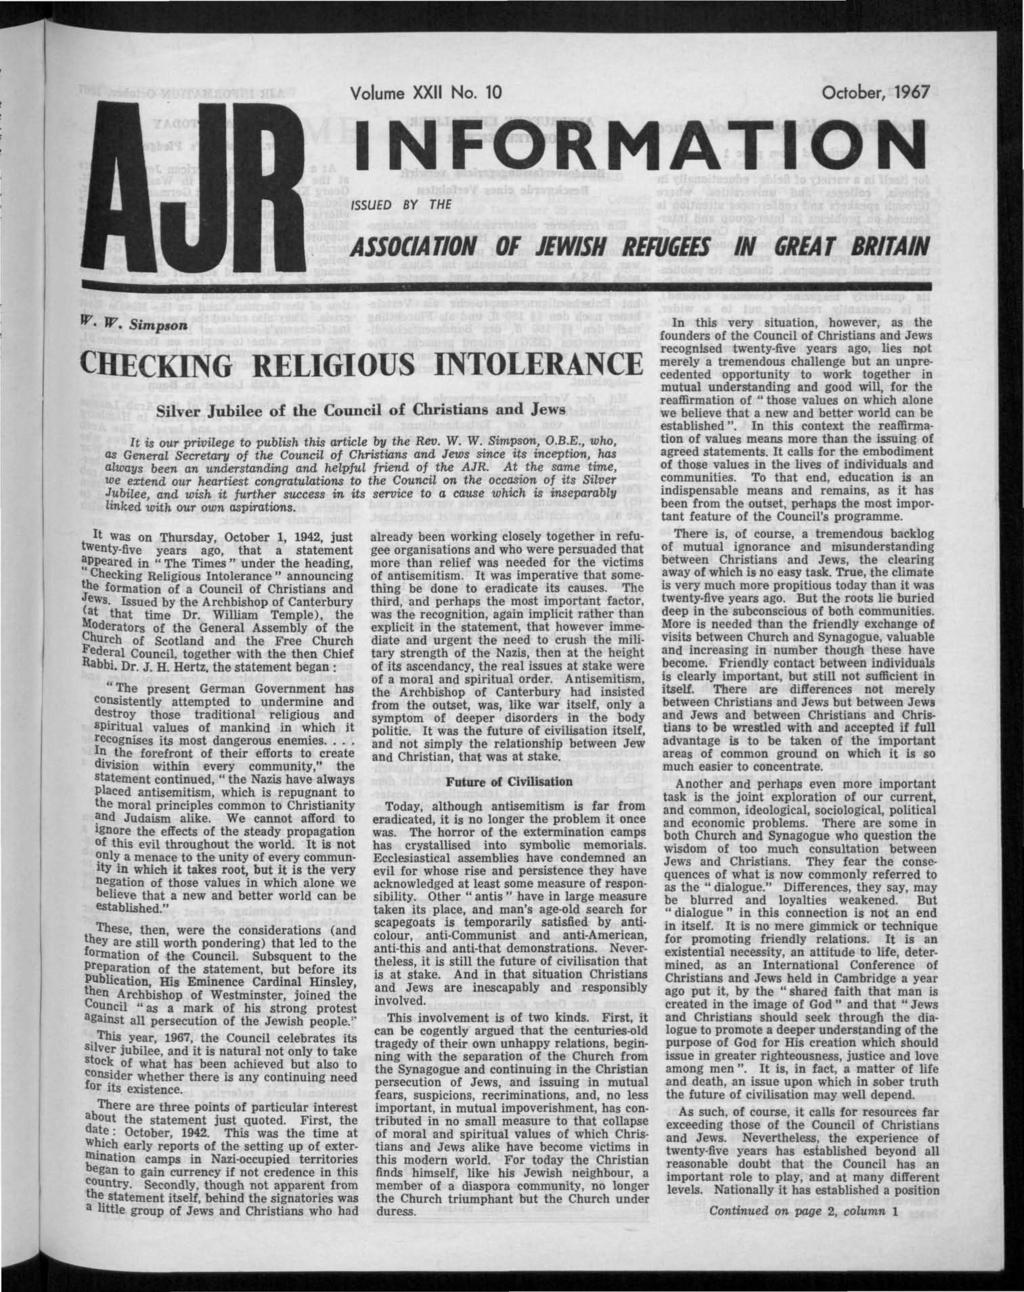 Volume XXII No. 10 October, 1967 INFORMATION ISSUED BY THE ASSOCIATION OF JEWISH REFUGEES IN GREAT BRITAIN "^' V.